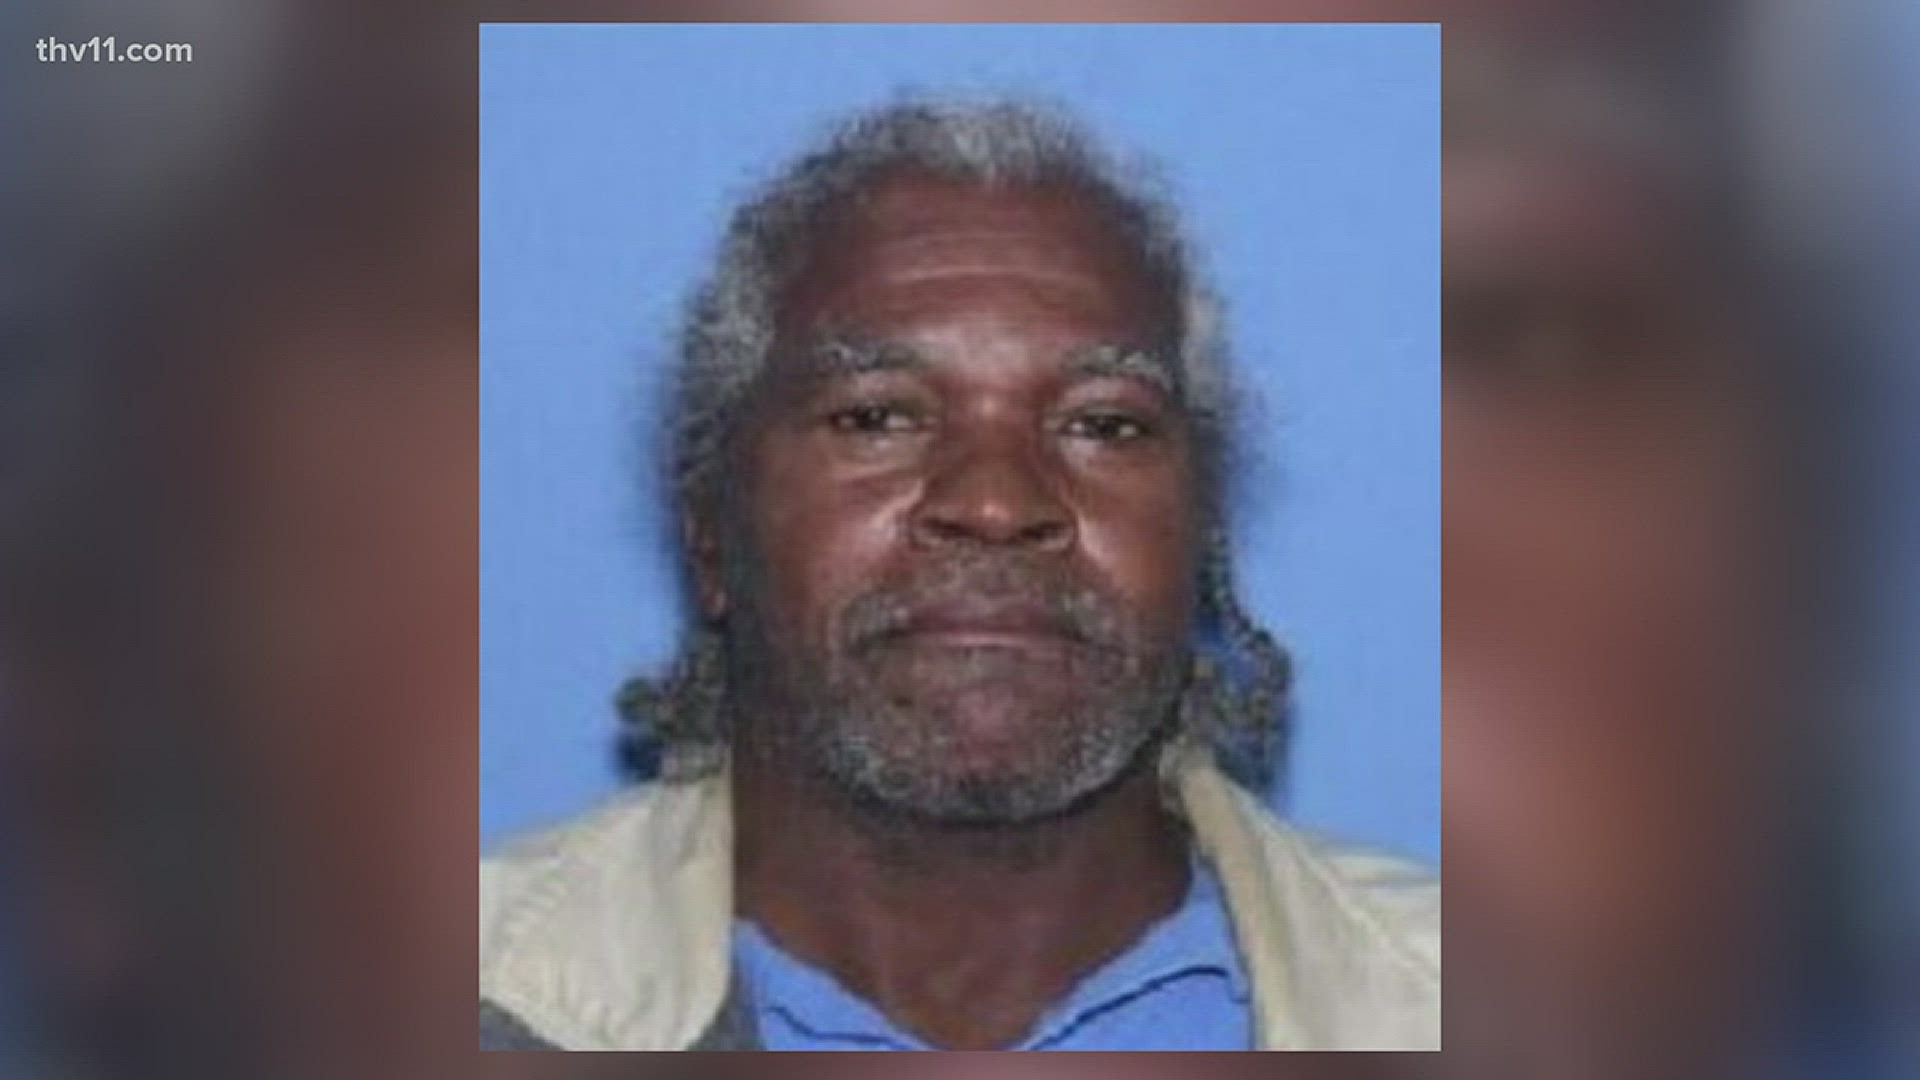 Benton police are searching for a 66-year-old James Earl Griffin who has not been seen since cashing his paycheck on January 3rd.